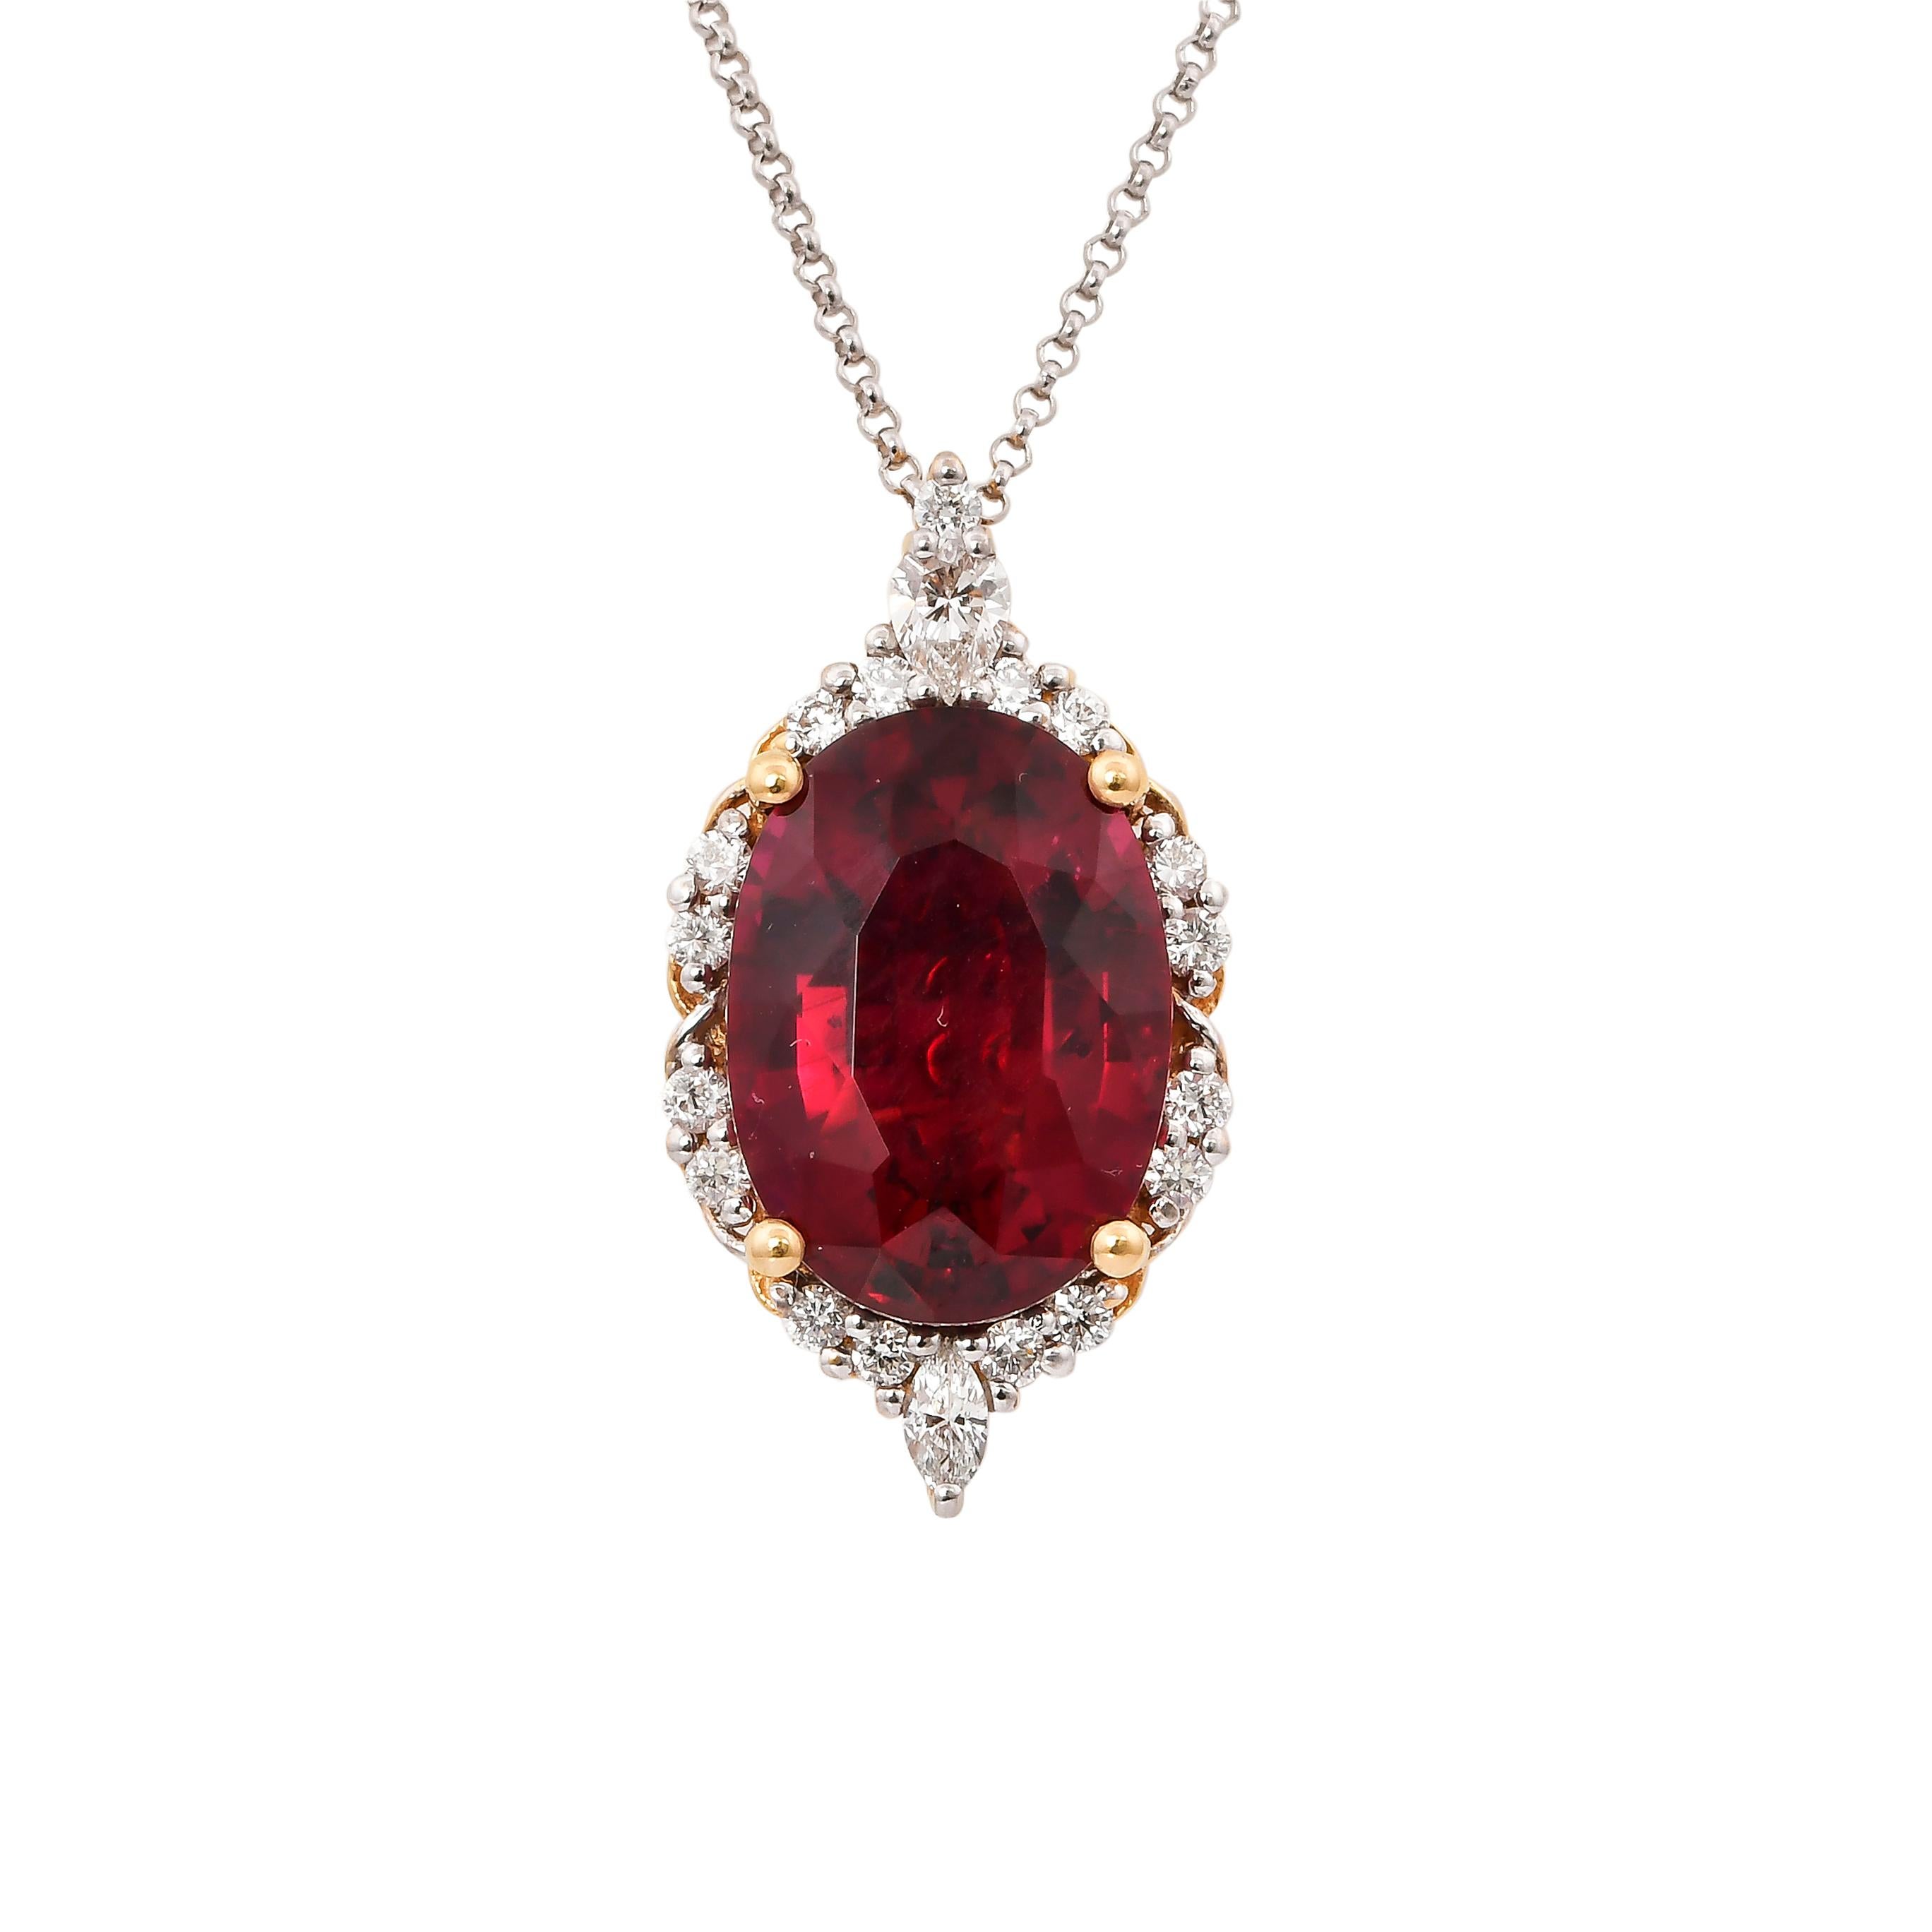 This collection features the most radiant Rubellite tourmalines. These gemstones show a magnificent and regal deep red colour, and the yellow gold and diamond accents makes these pieces a true showstopper. 

Classic Rubellite tourmaline pendant in